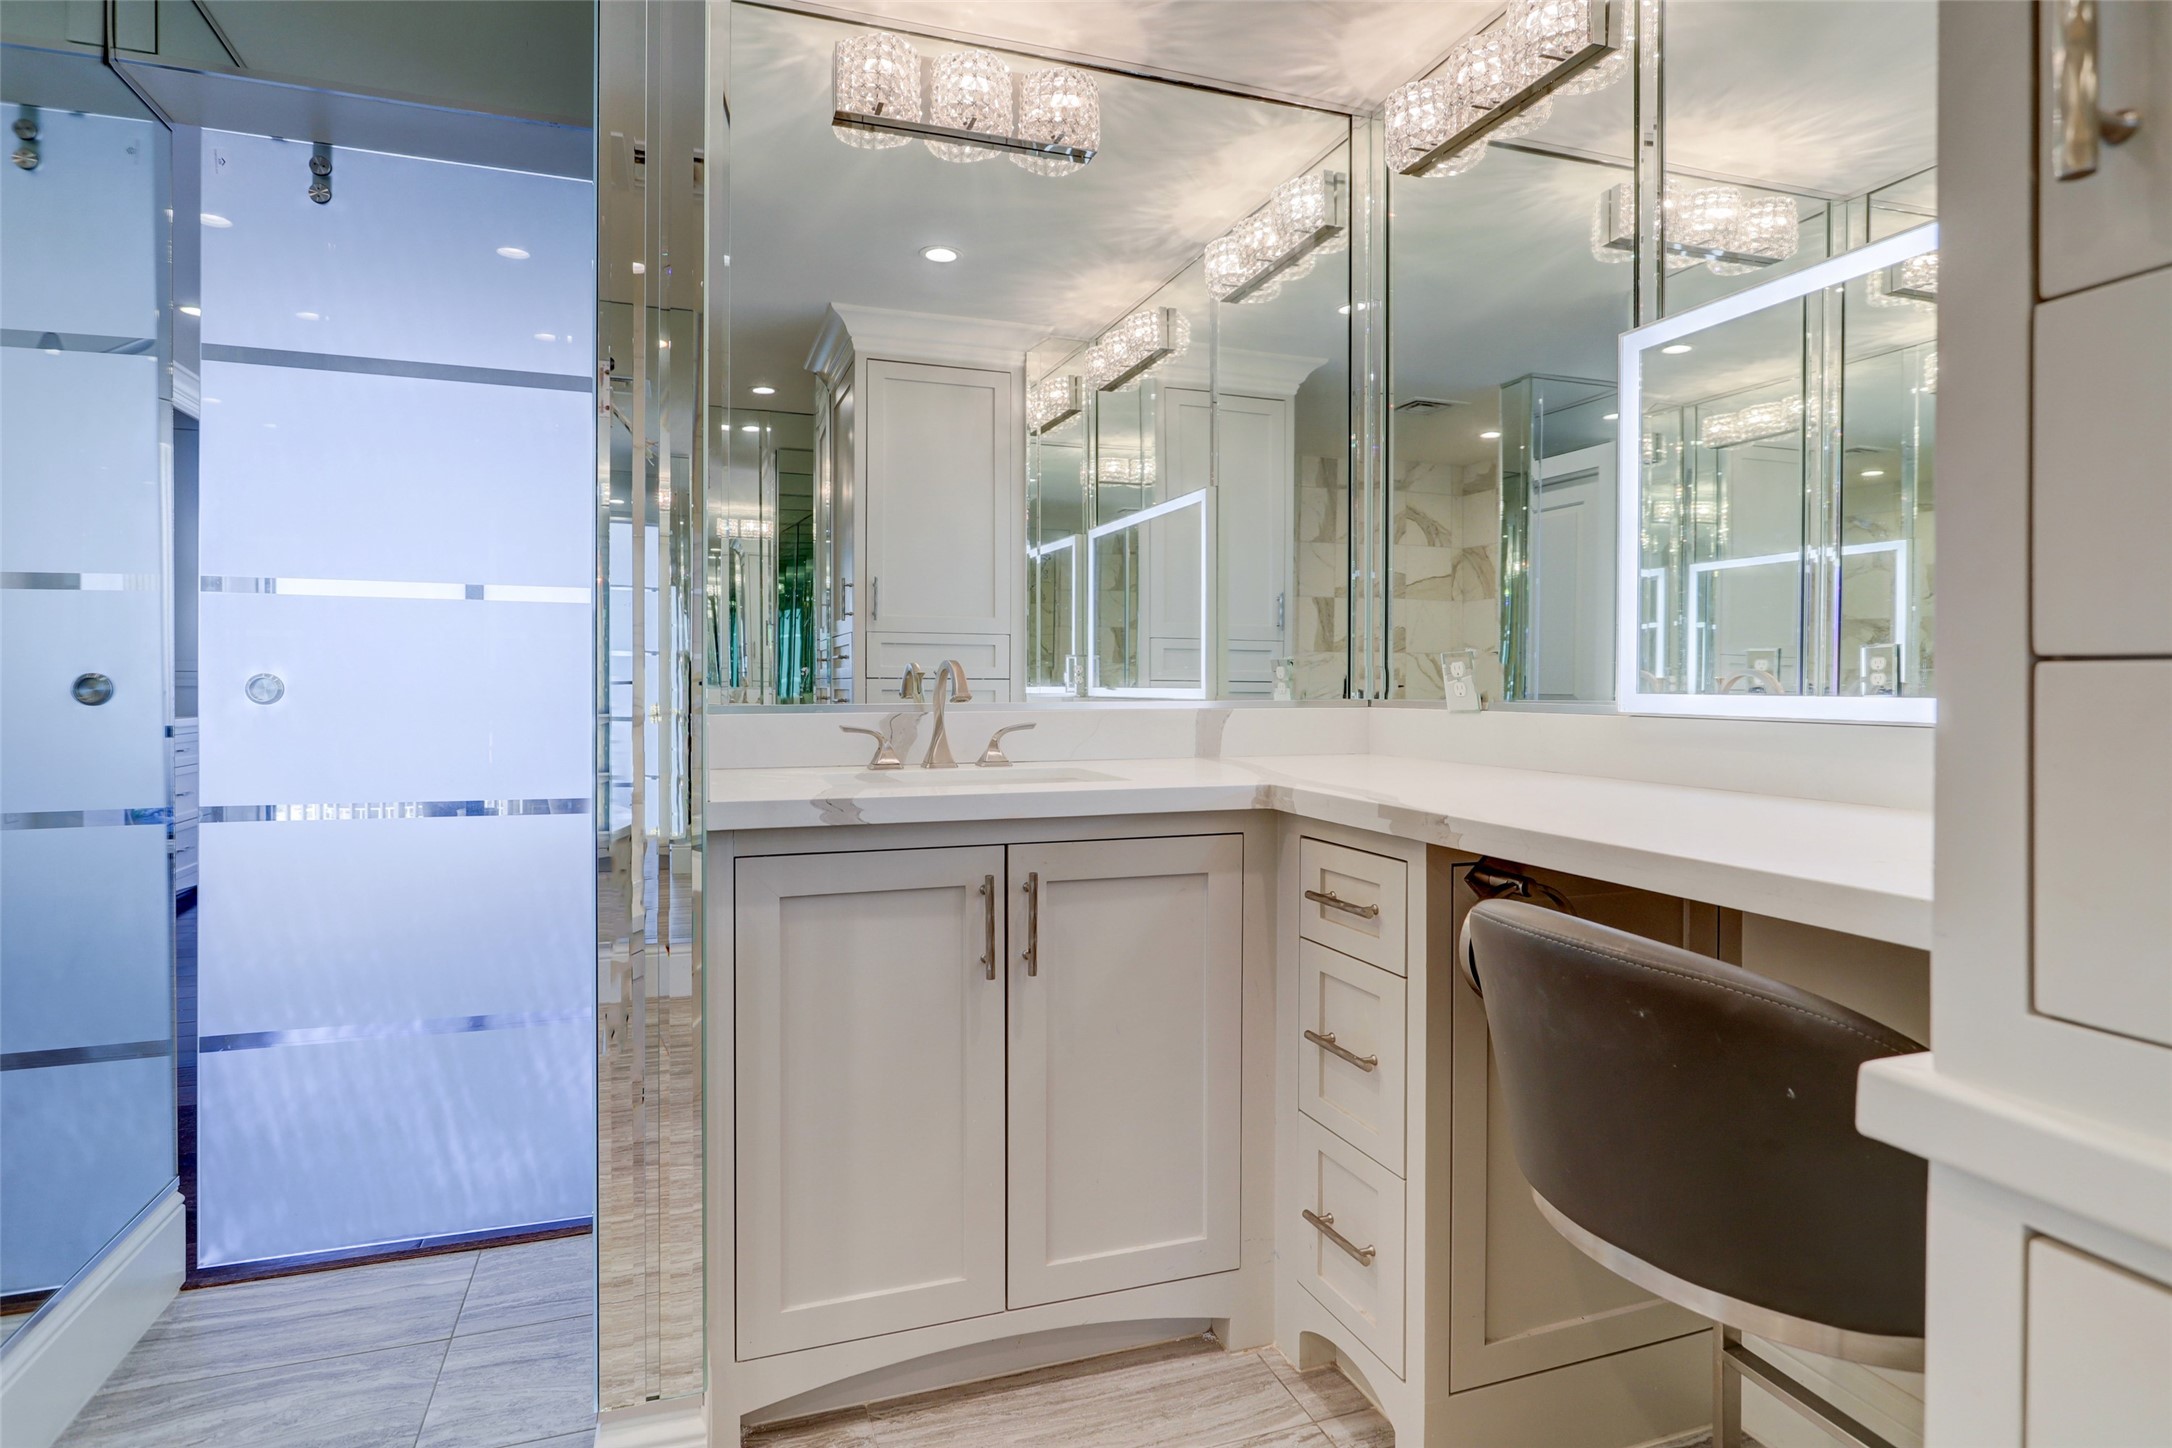 The lighted mirror is a nice addition to the vanity area with quartz counters and brushed nickel hardware.